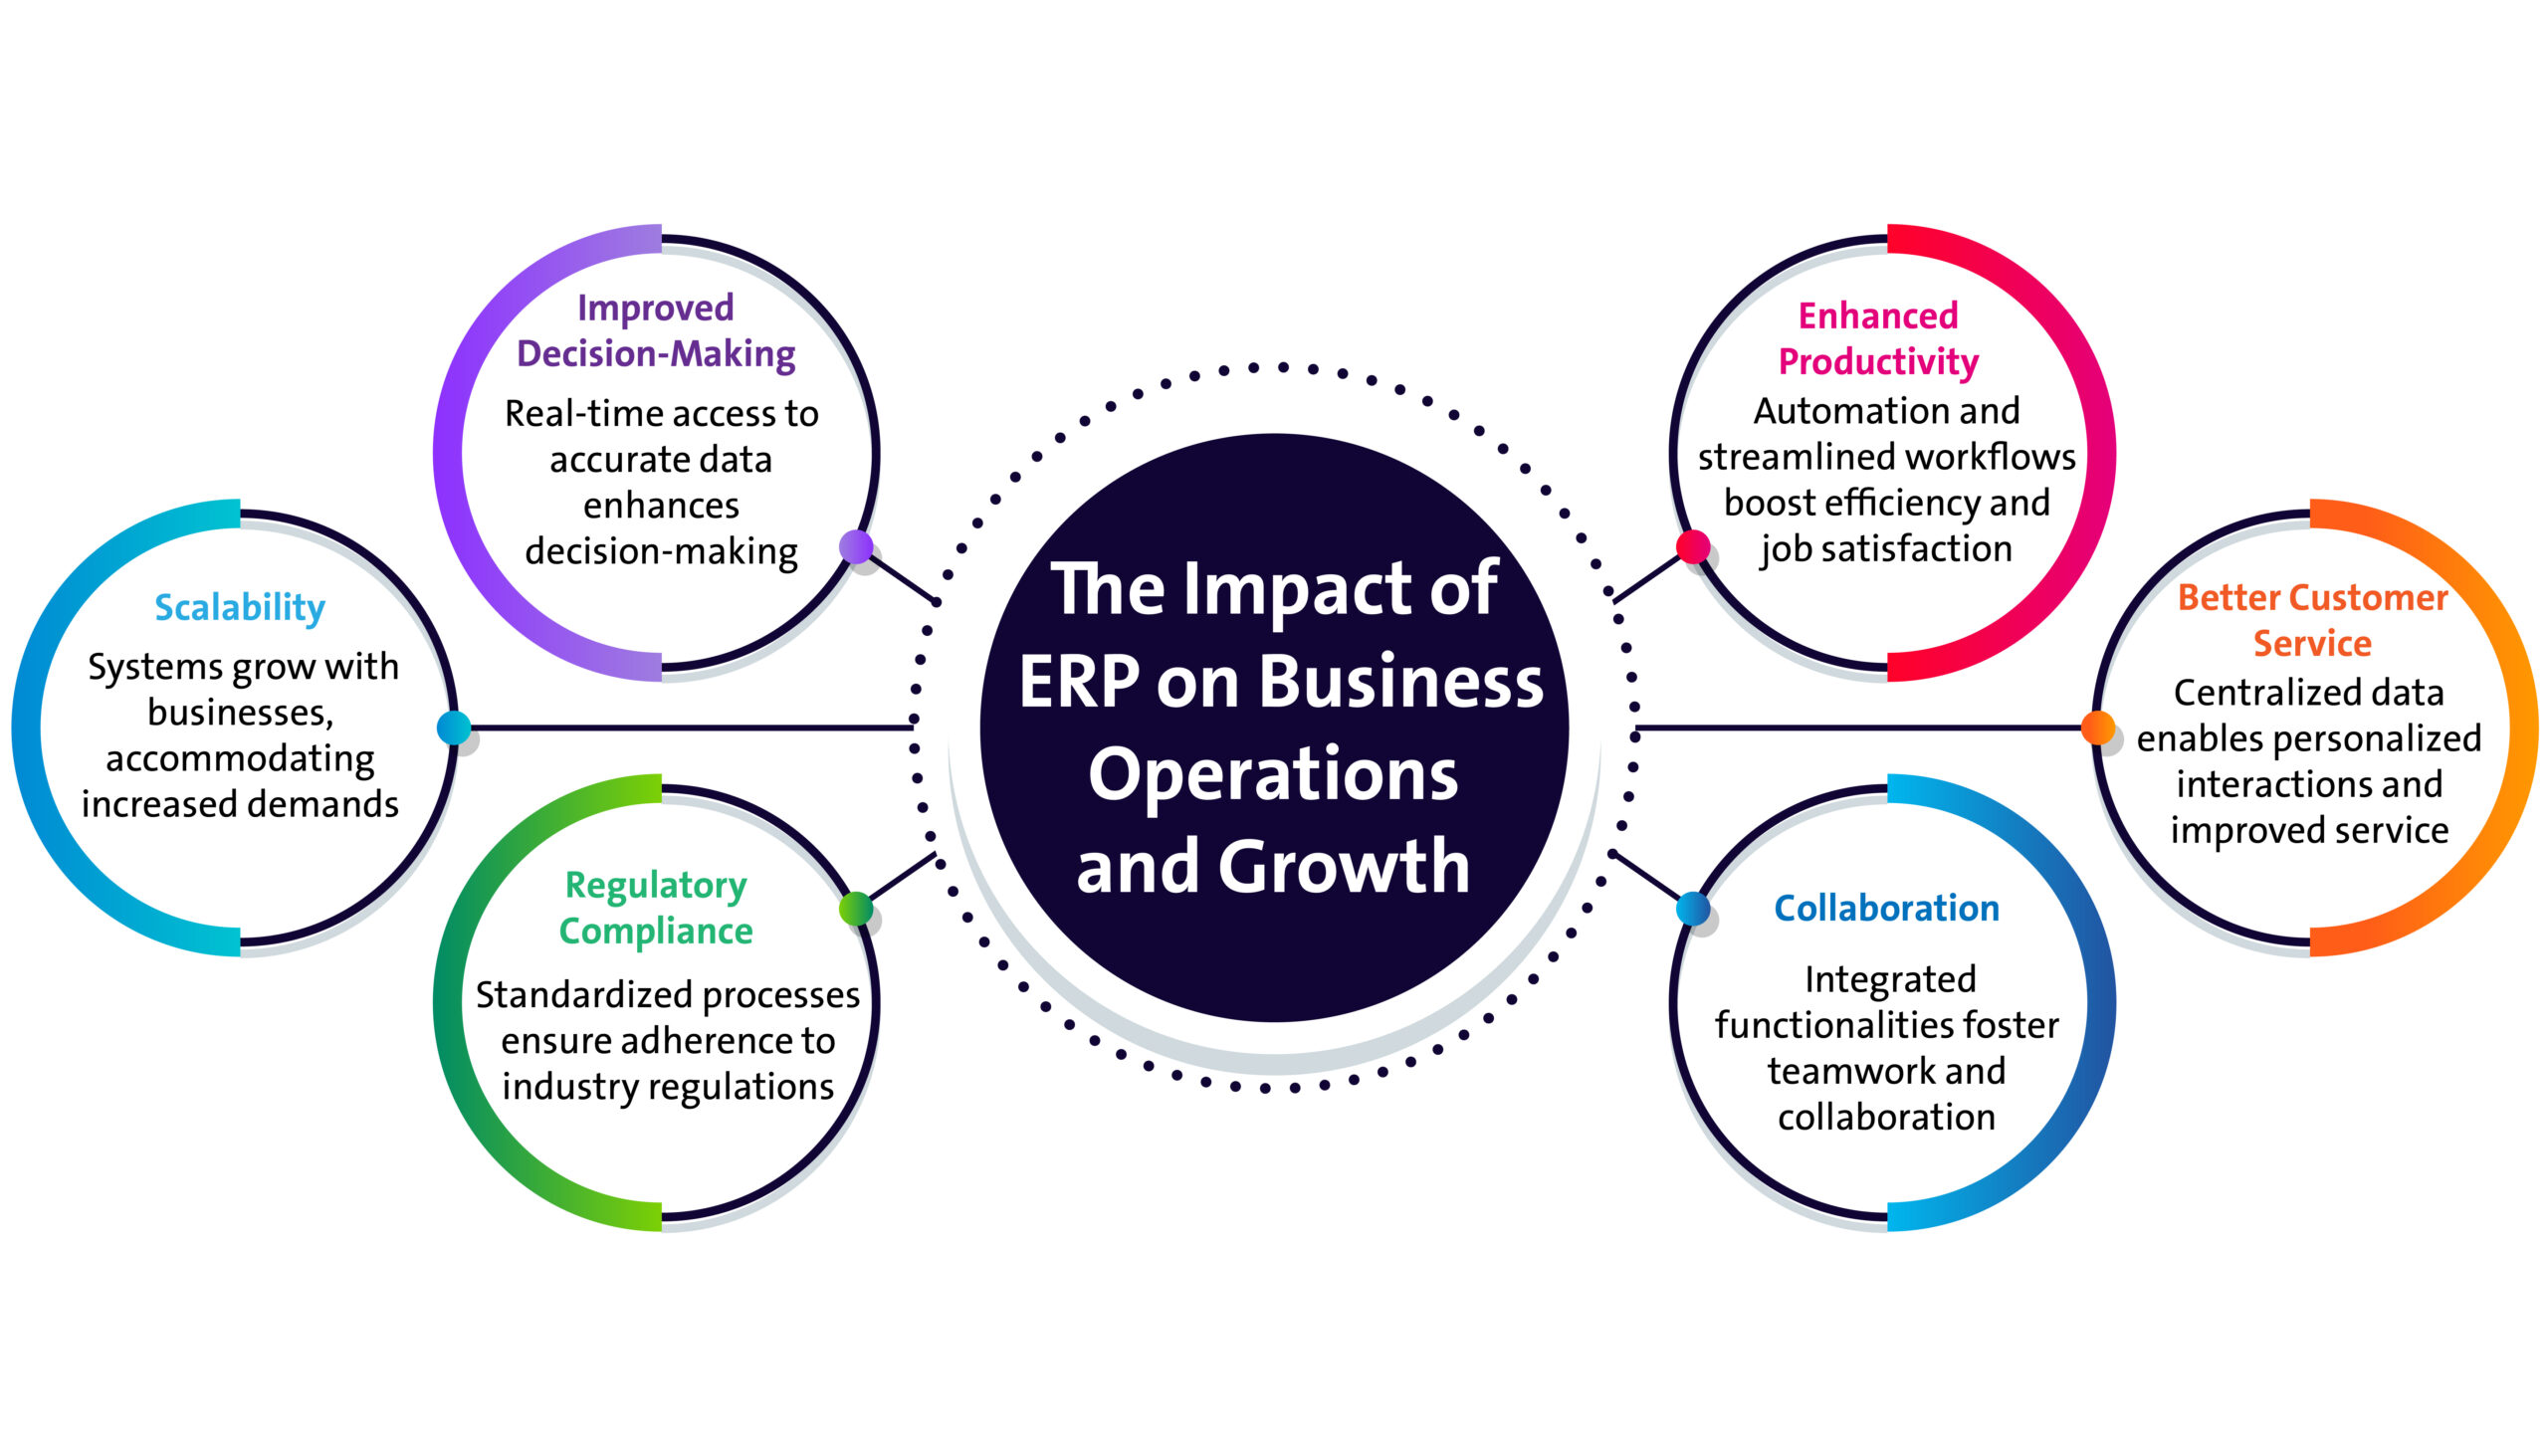 The Impact of ERP on Business Operations and Growth